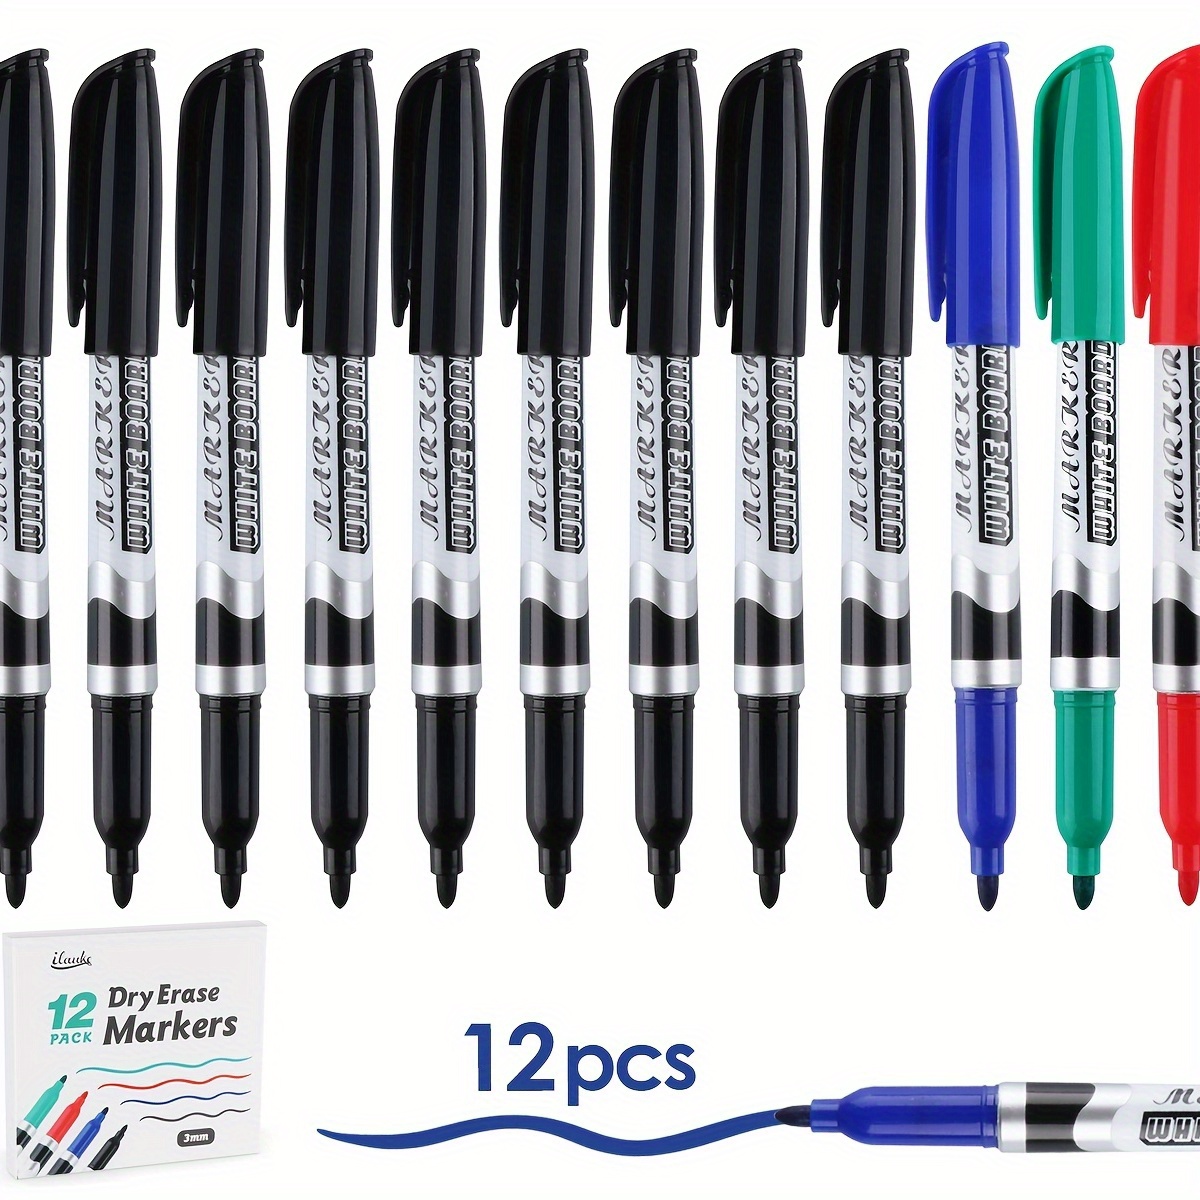 Emraw Assorted Color Bullet Tip Jumbo Permanent Marker with Grip Dry Erase  Low Odor Whiteboard Comfortable Grip Office Markers for Paper and Plastic  Mini Sharpie Pens Pack of 2 